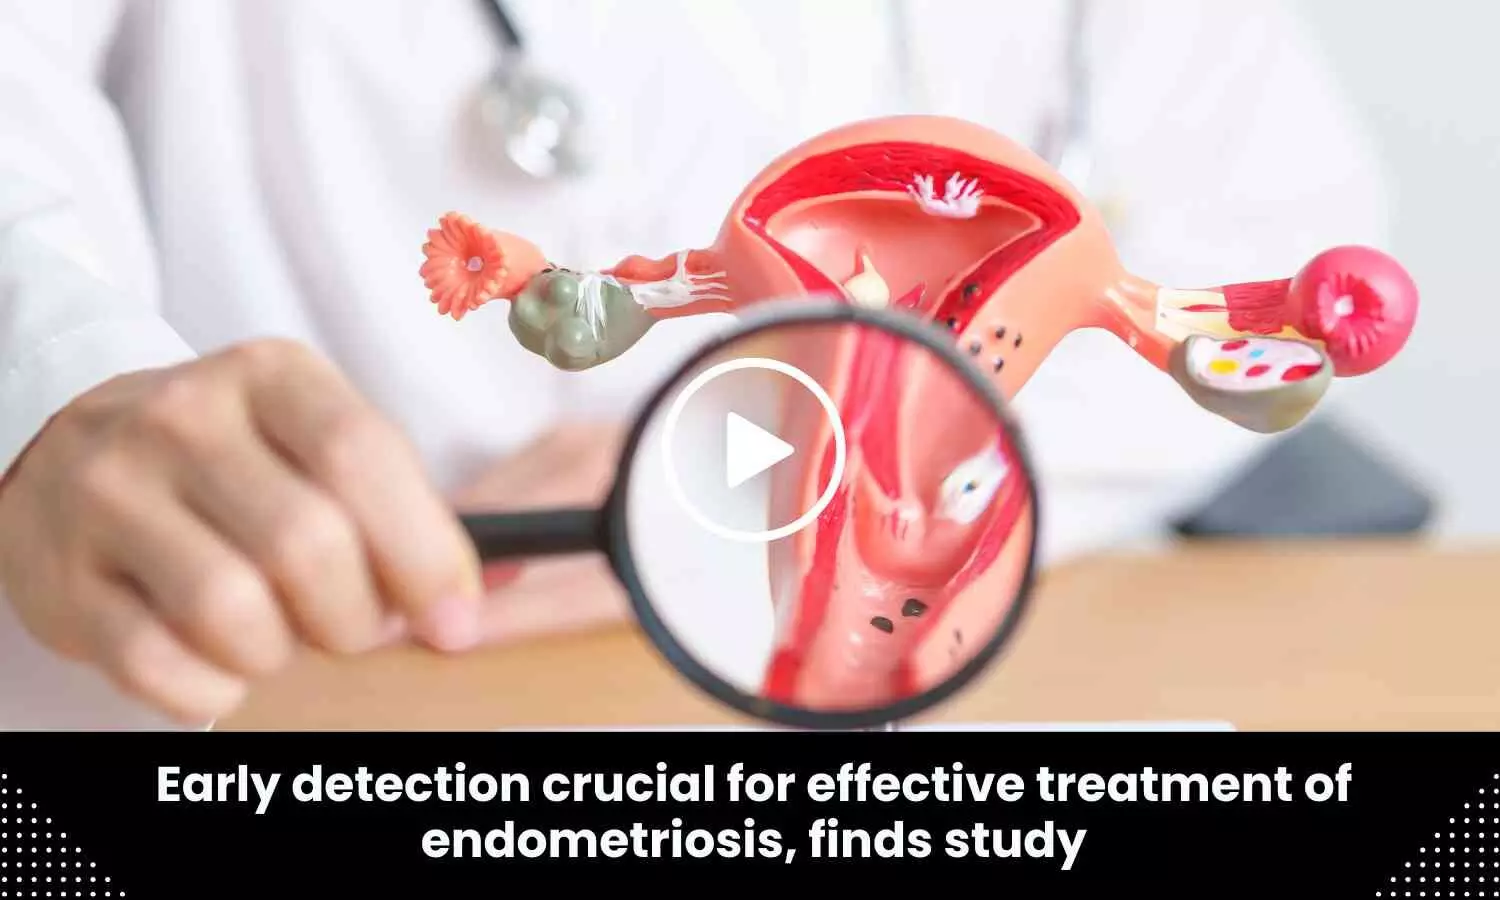 Early detection crucial for effective treatment of endometriosis, finds study